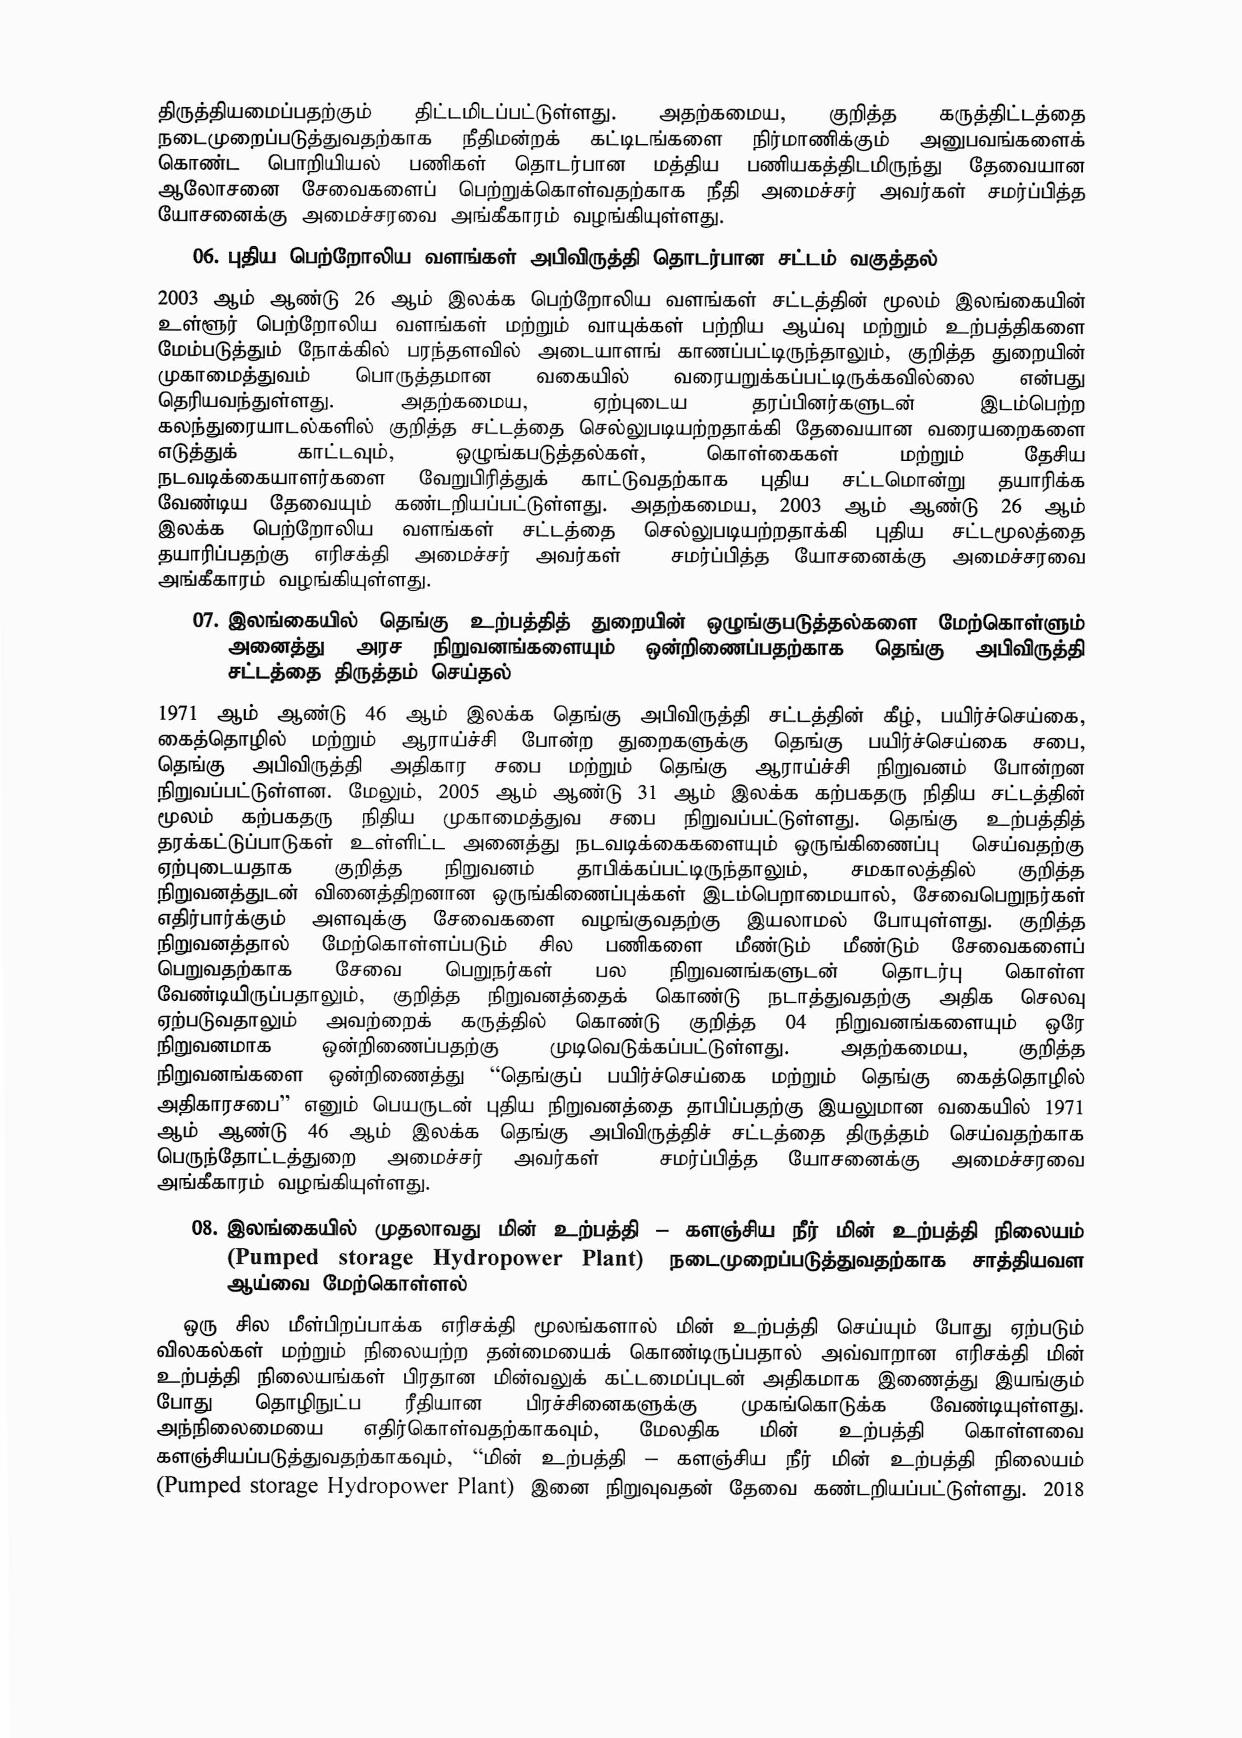 Cabinet Decision on 25.01.2021 Tamil page 003